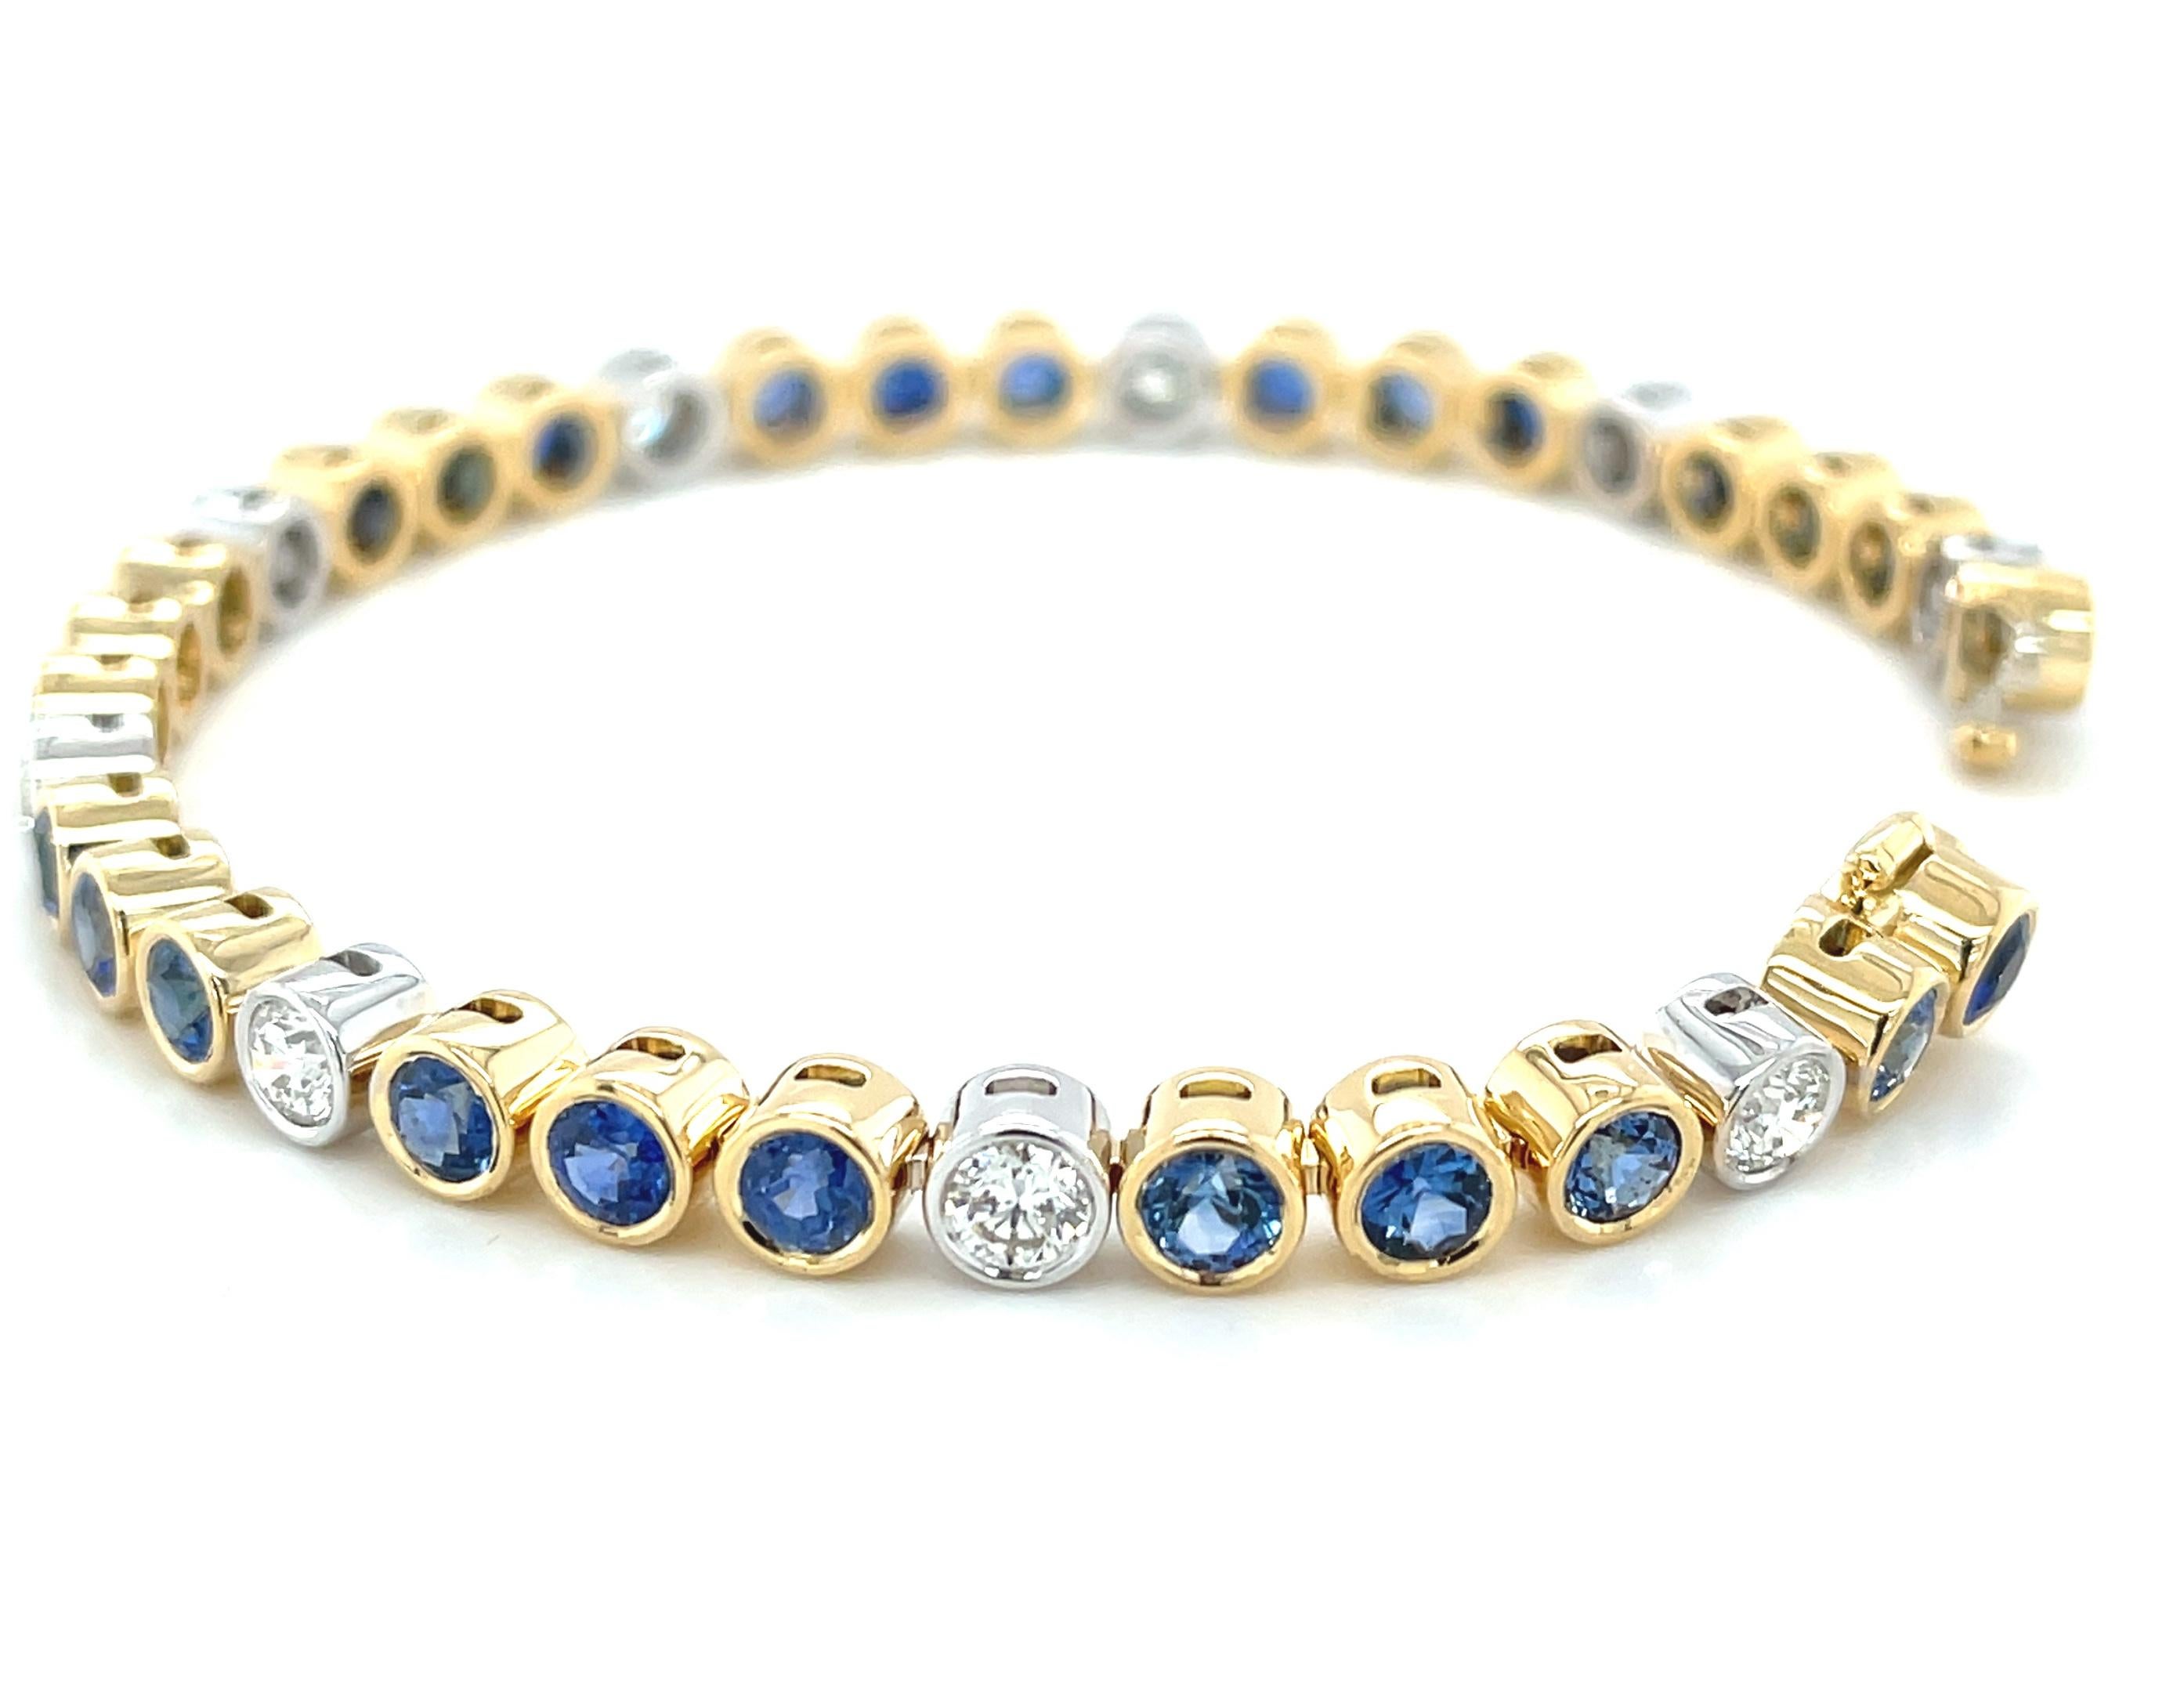 This luxurious blue sapphire and diamond tennis bracelet features over 7 carats of top quality Ceylon blue sapphires accented with over 2 carats of sparkling diamonds! The blue sapphires have beautifully even, rich blue color and are 